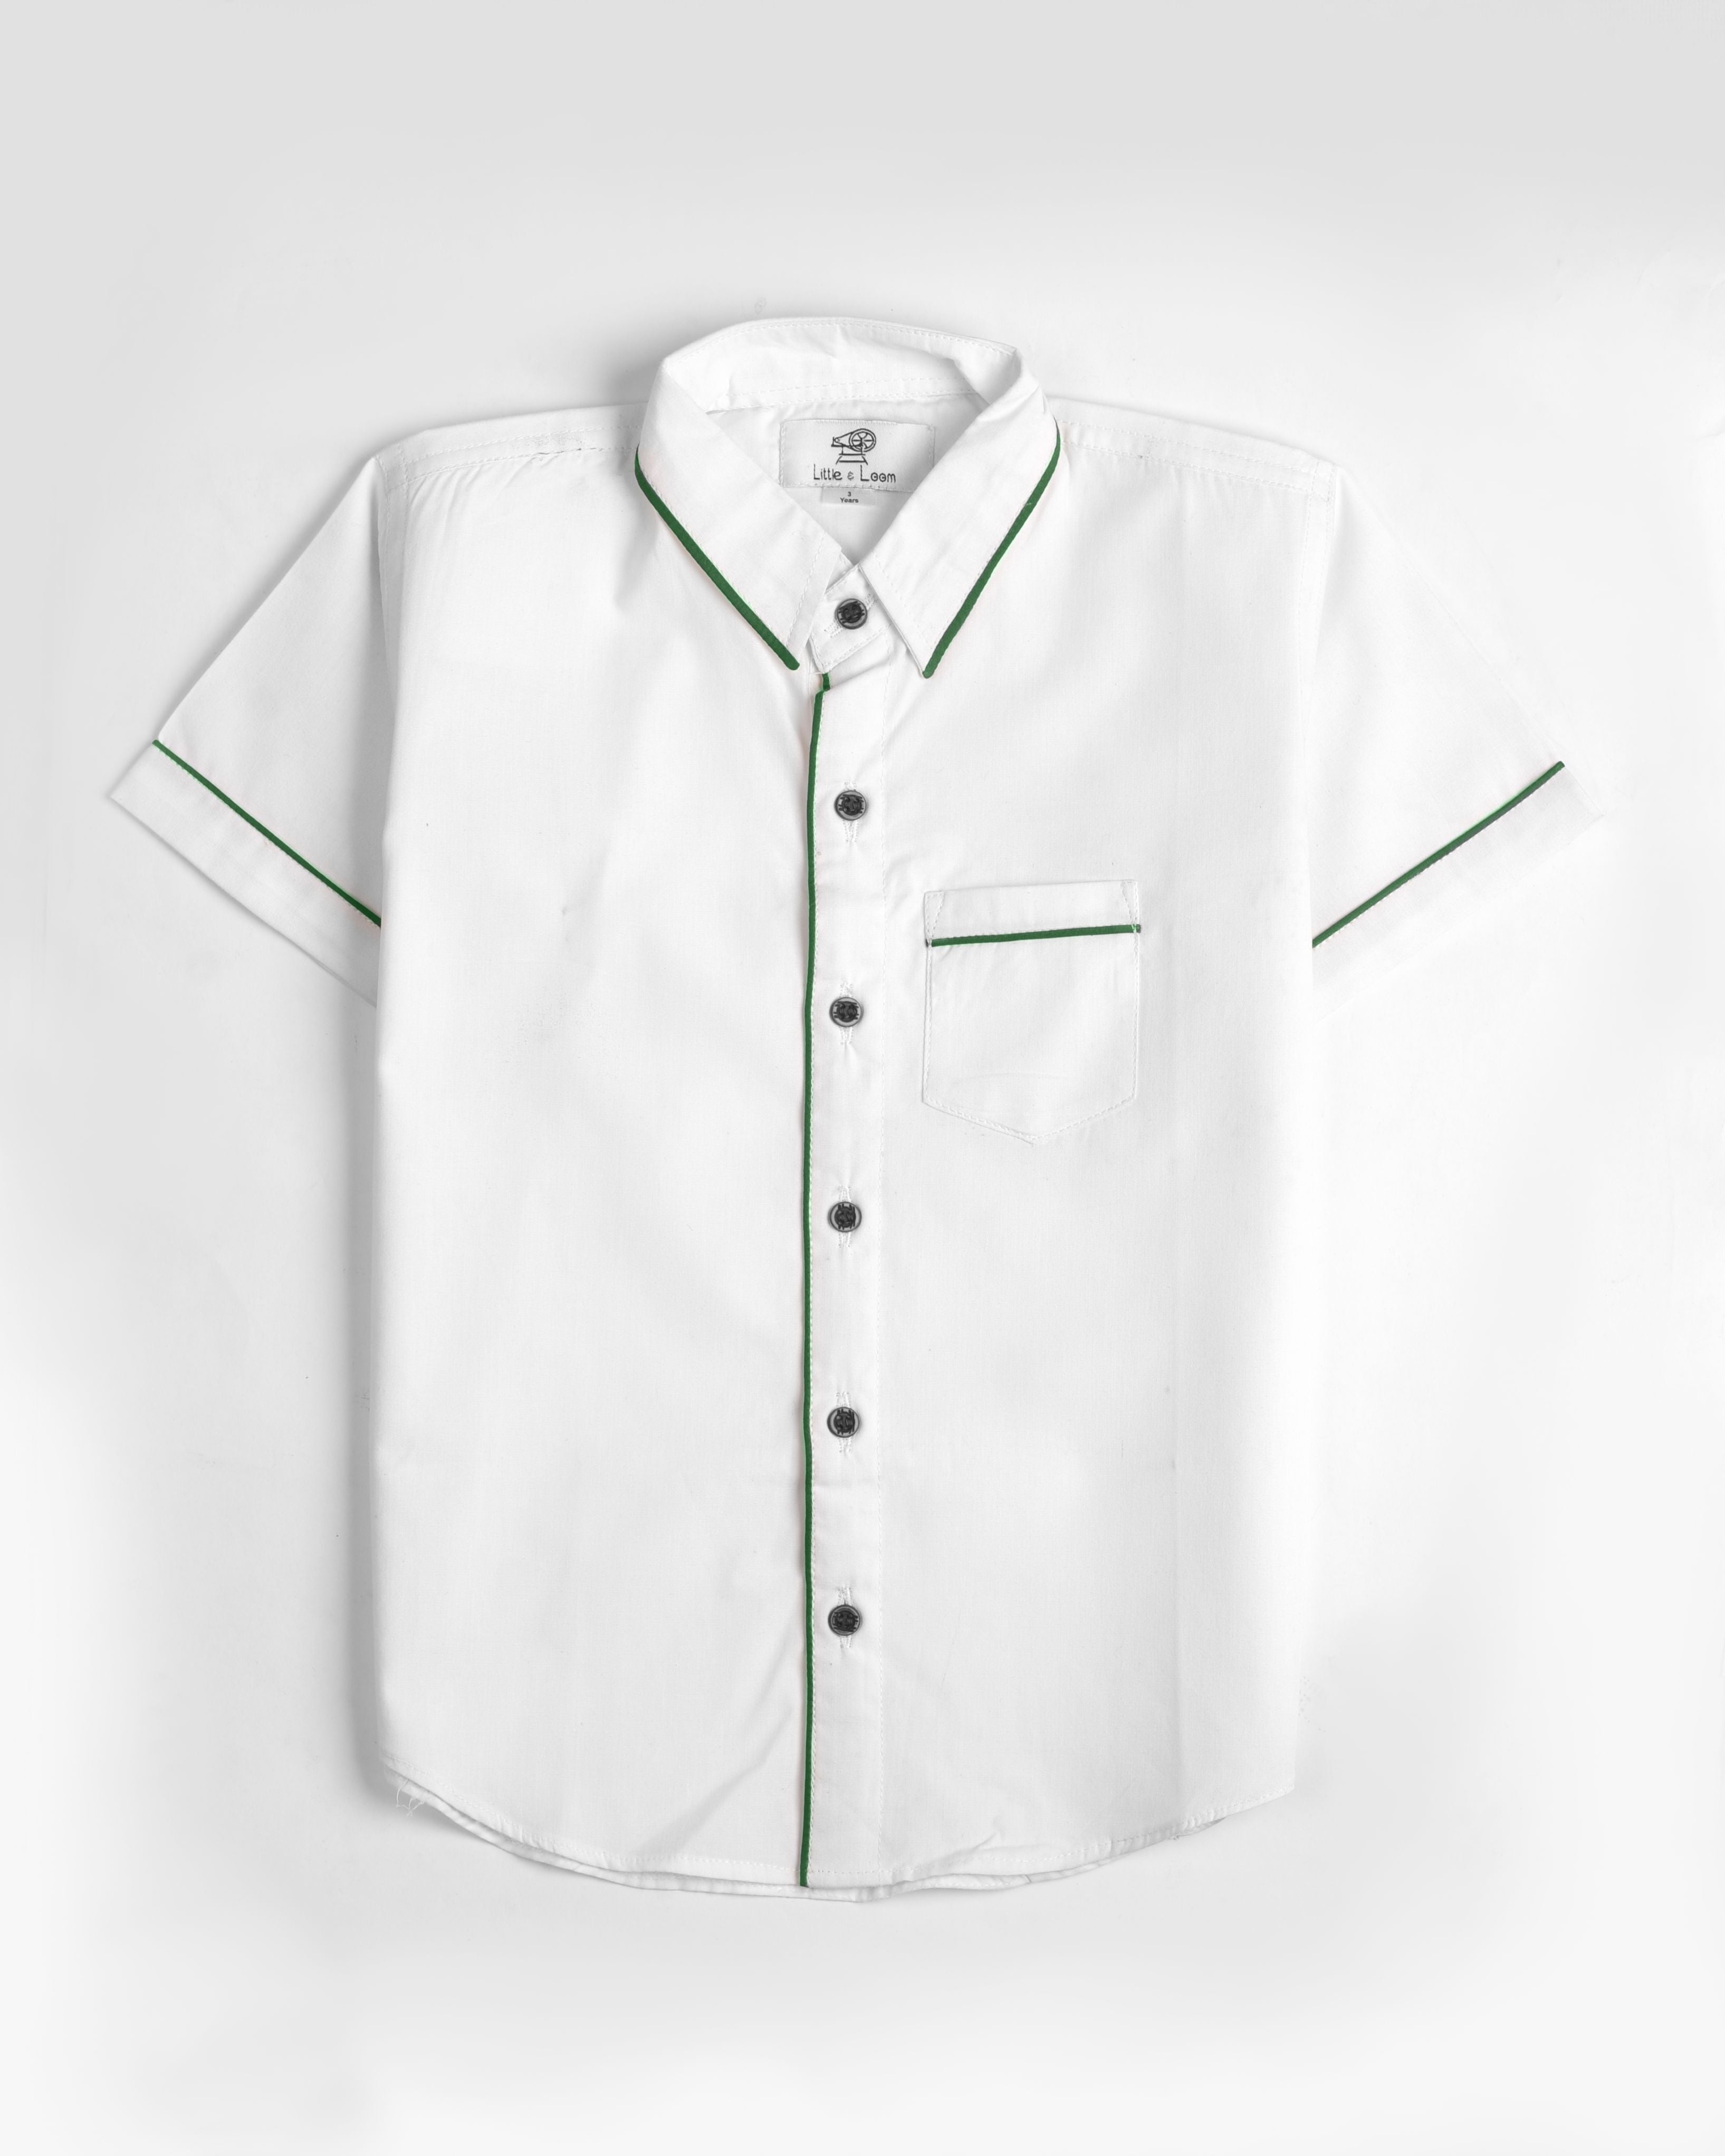 White Half Sleeves shirt with Green detailings